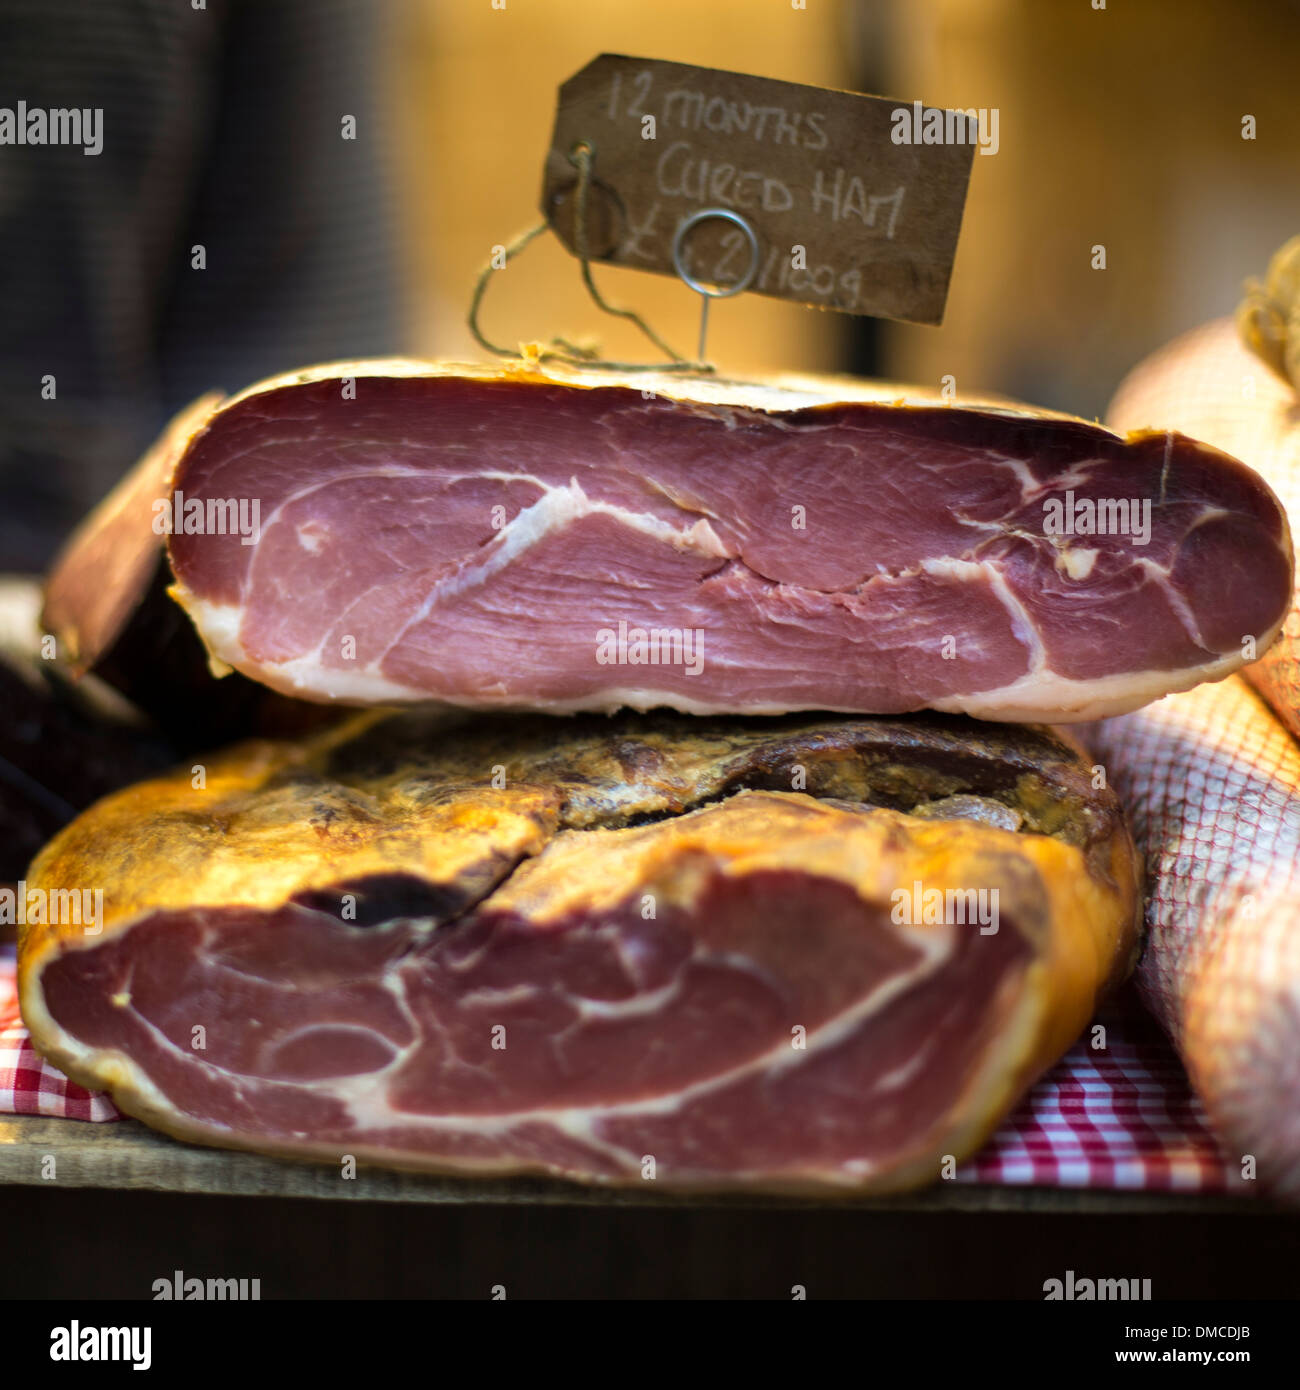 12 months cured ham on sale at Borough Market, London Stock Photo